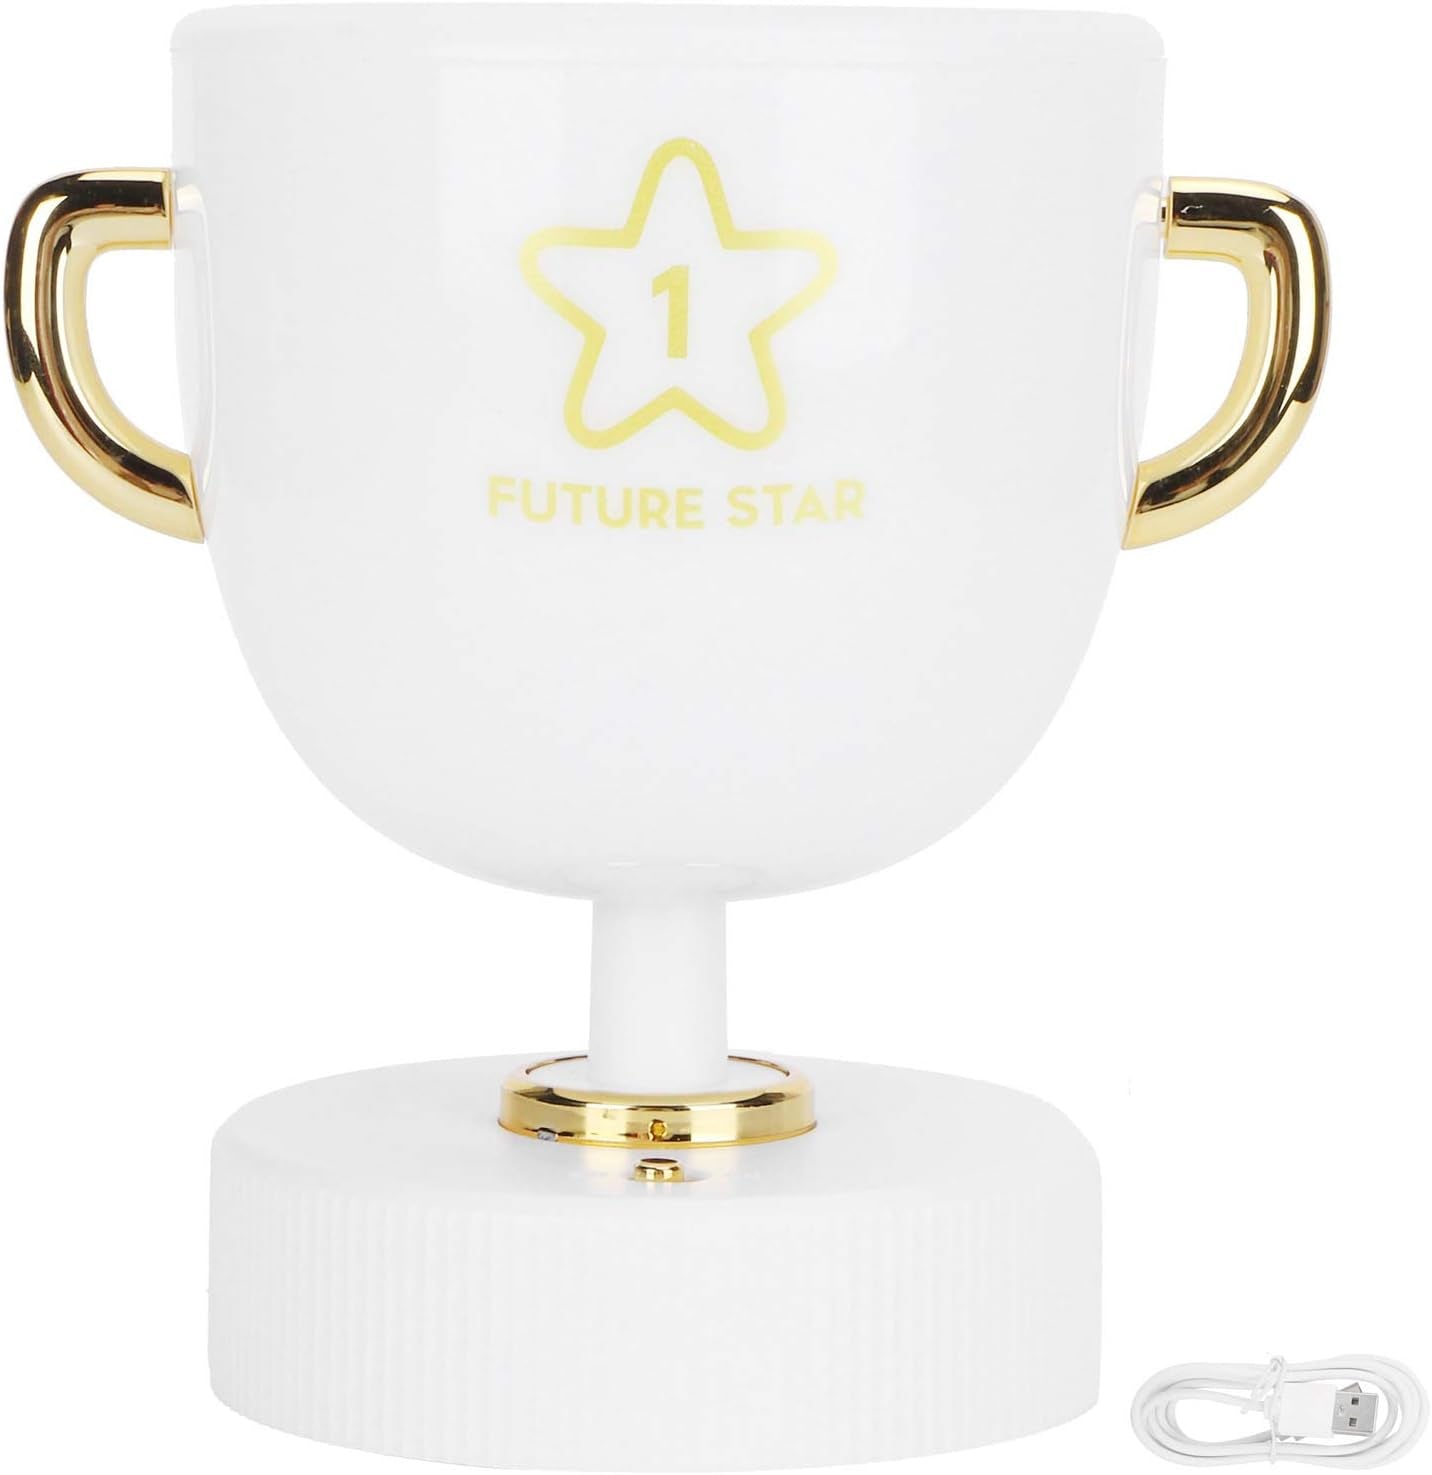 Nursery Night Light with Pen Holder for Bedroom, Trophy Cup USB Charging Desk Lamp,Led Desk Lamp with Pencil Cup,Rechargeable White Small Desk Light for Bedroom